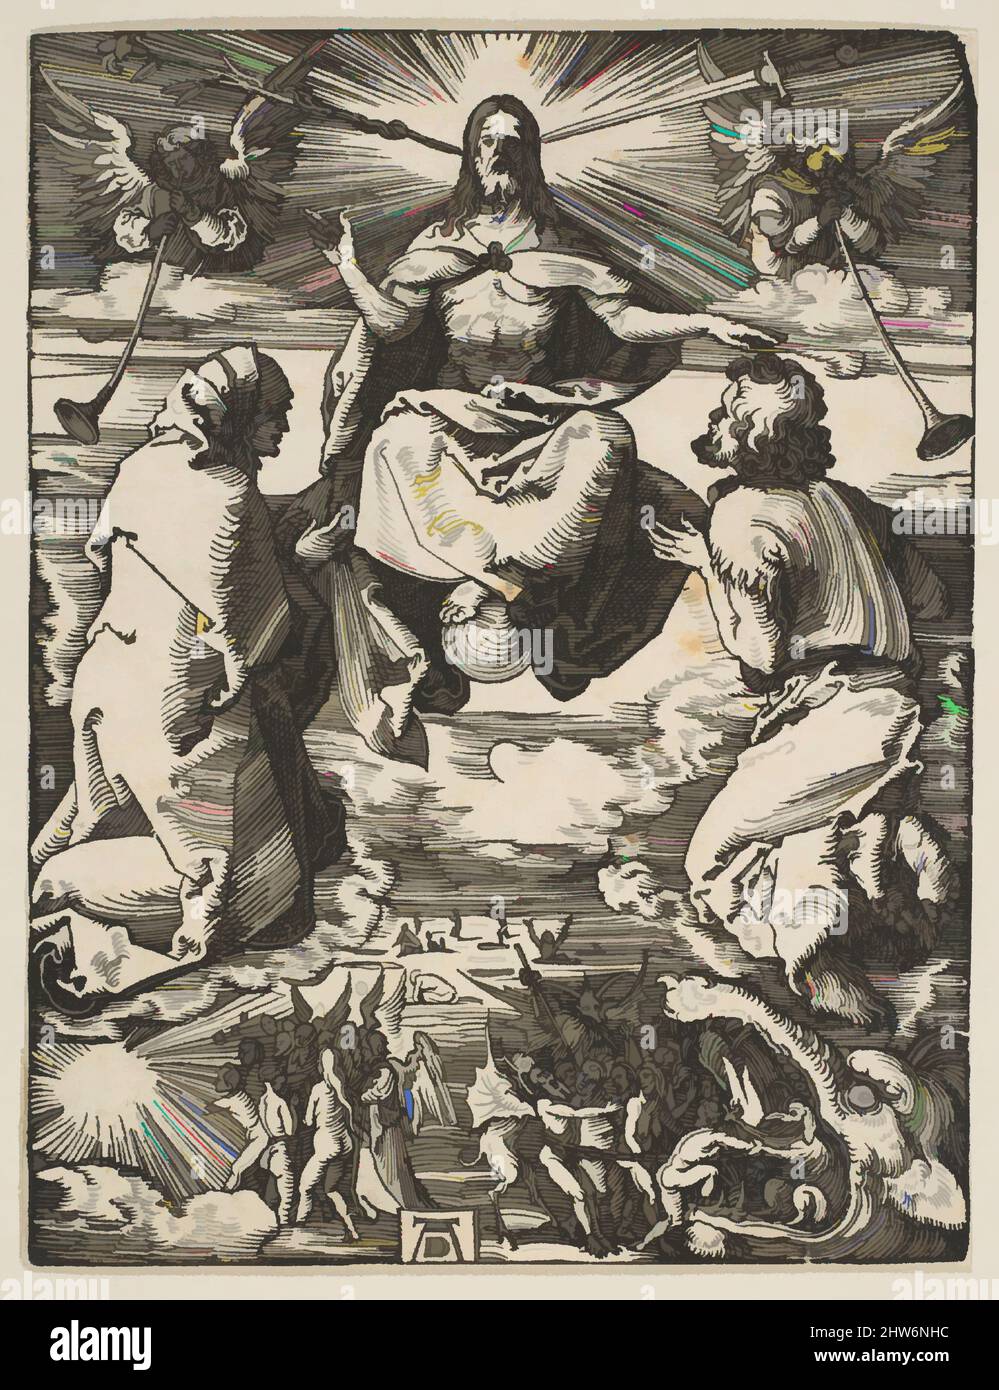 Art inspired by The Last Judgment, from The Small Passion, ca. 1510, Woodcut, sheet: 5 x 3 13/16 in. (12.7 x 9.7 cm), Prints, Albrecht Dürer (German, Nuremberg 1471–1528 Nuremberg, Classic works modernized by Artotop with a splash of modernity. Shapes, color and value, eye-catching visual impact on art. Emotions through freedom of artworks in a contemporary way. A timeless message pursuing a wildly creative new direction. Artists turning to the digital medium and creating the Artotop NFT Stock Photo